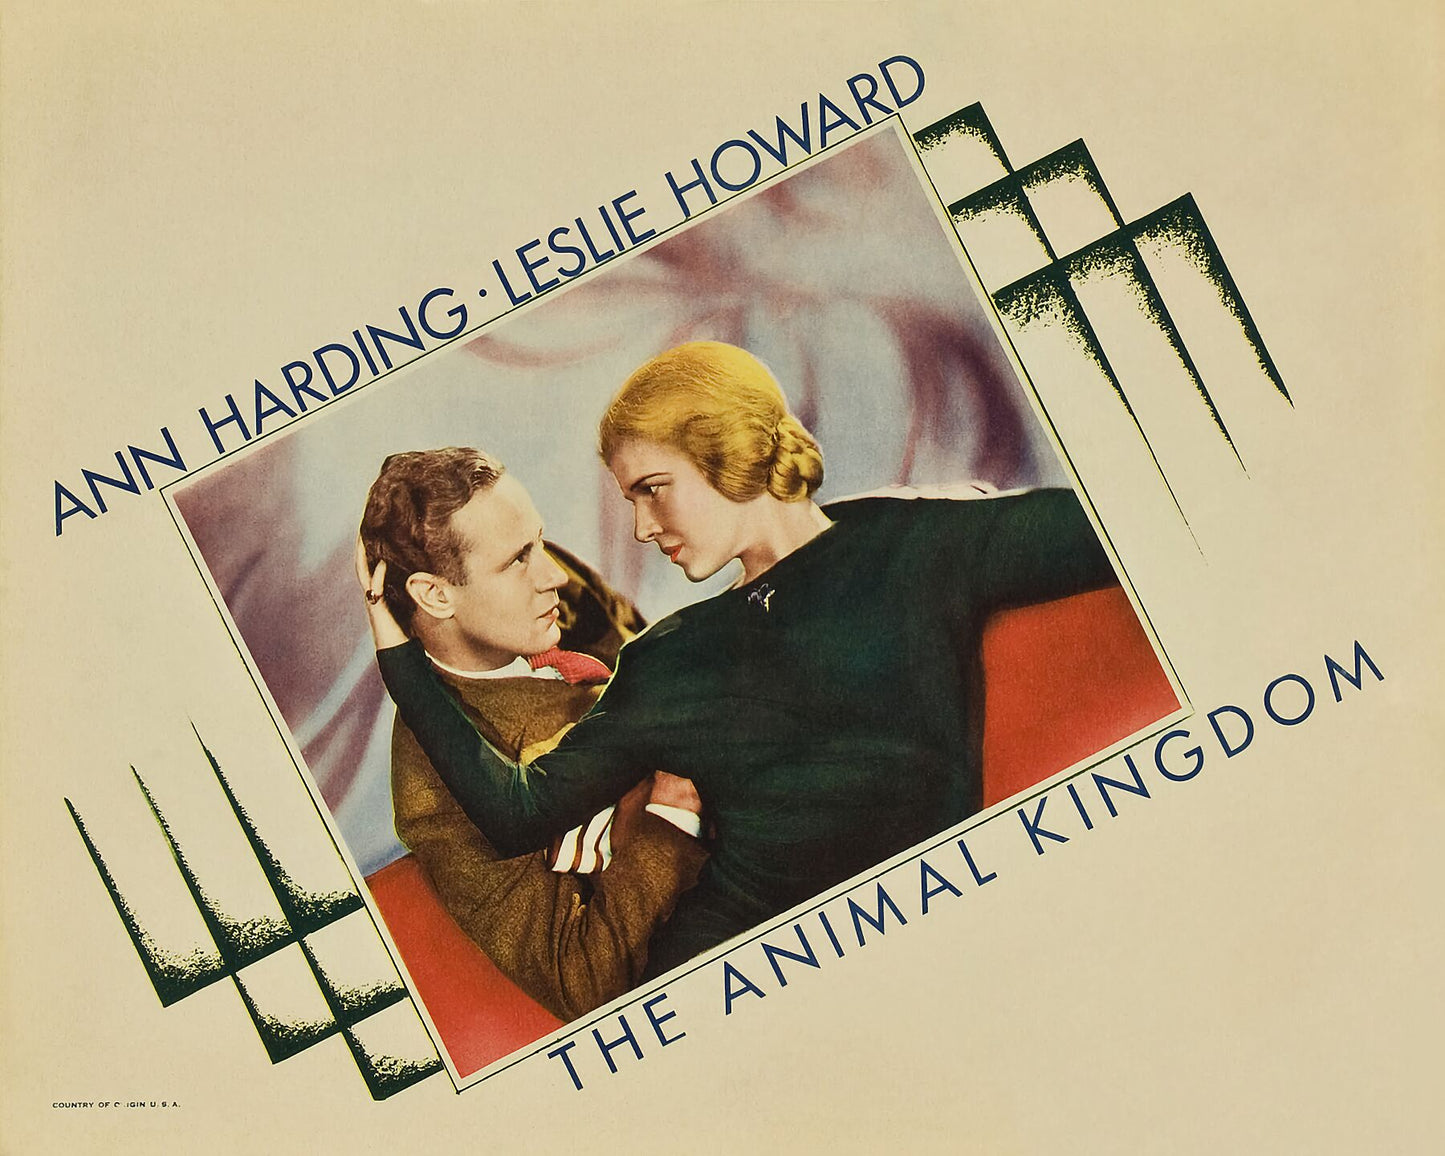 Film poster for the 1932 film The Animal Kingdom